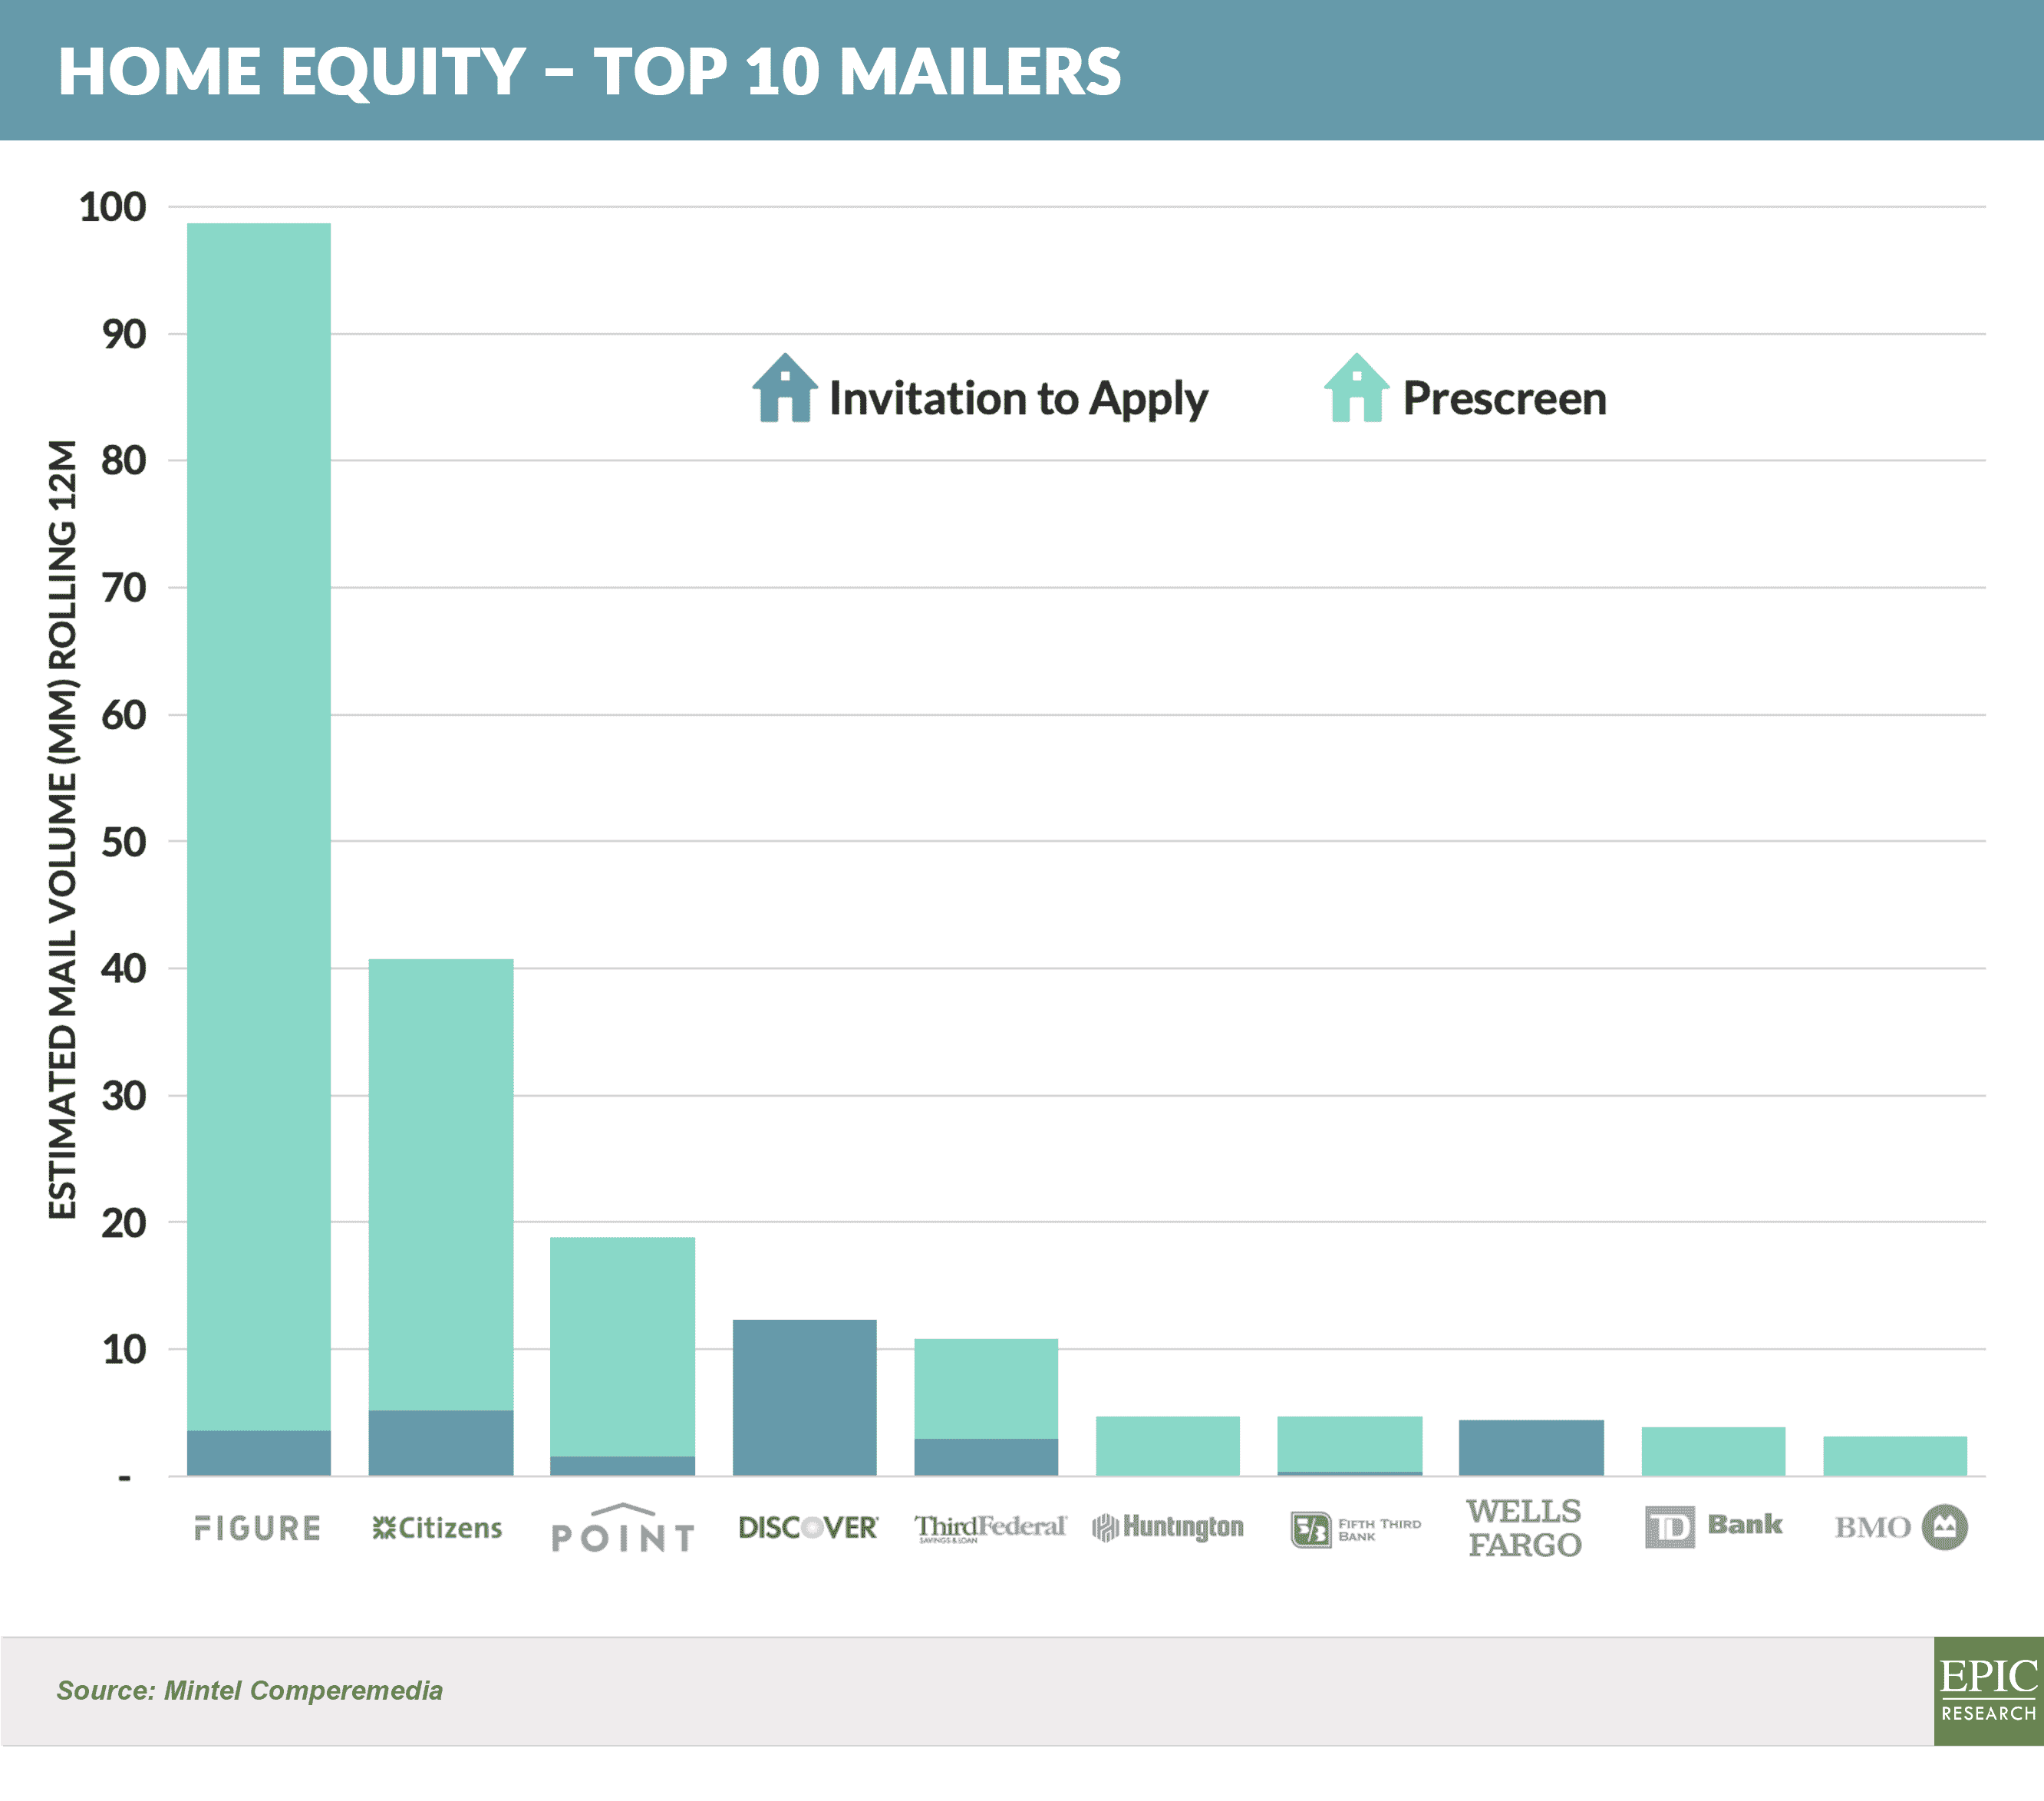 Home Equity Top Mailers